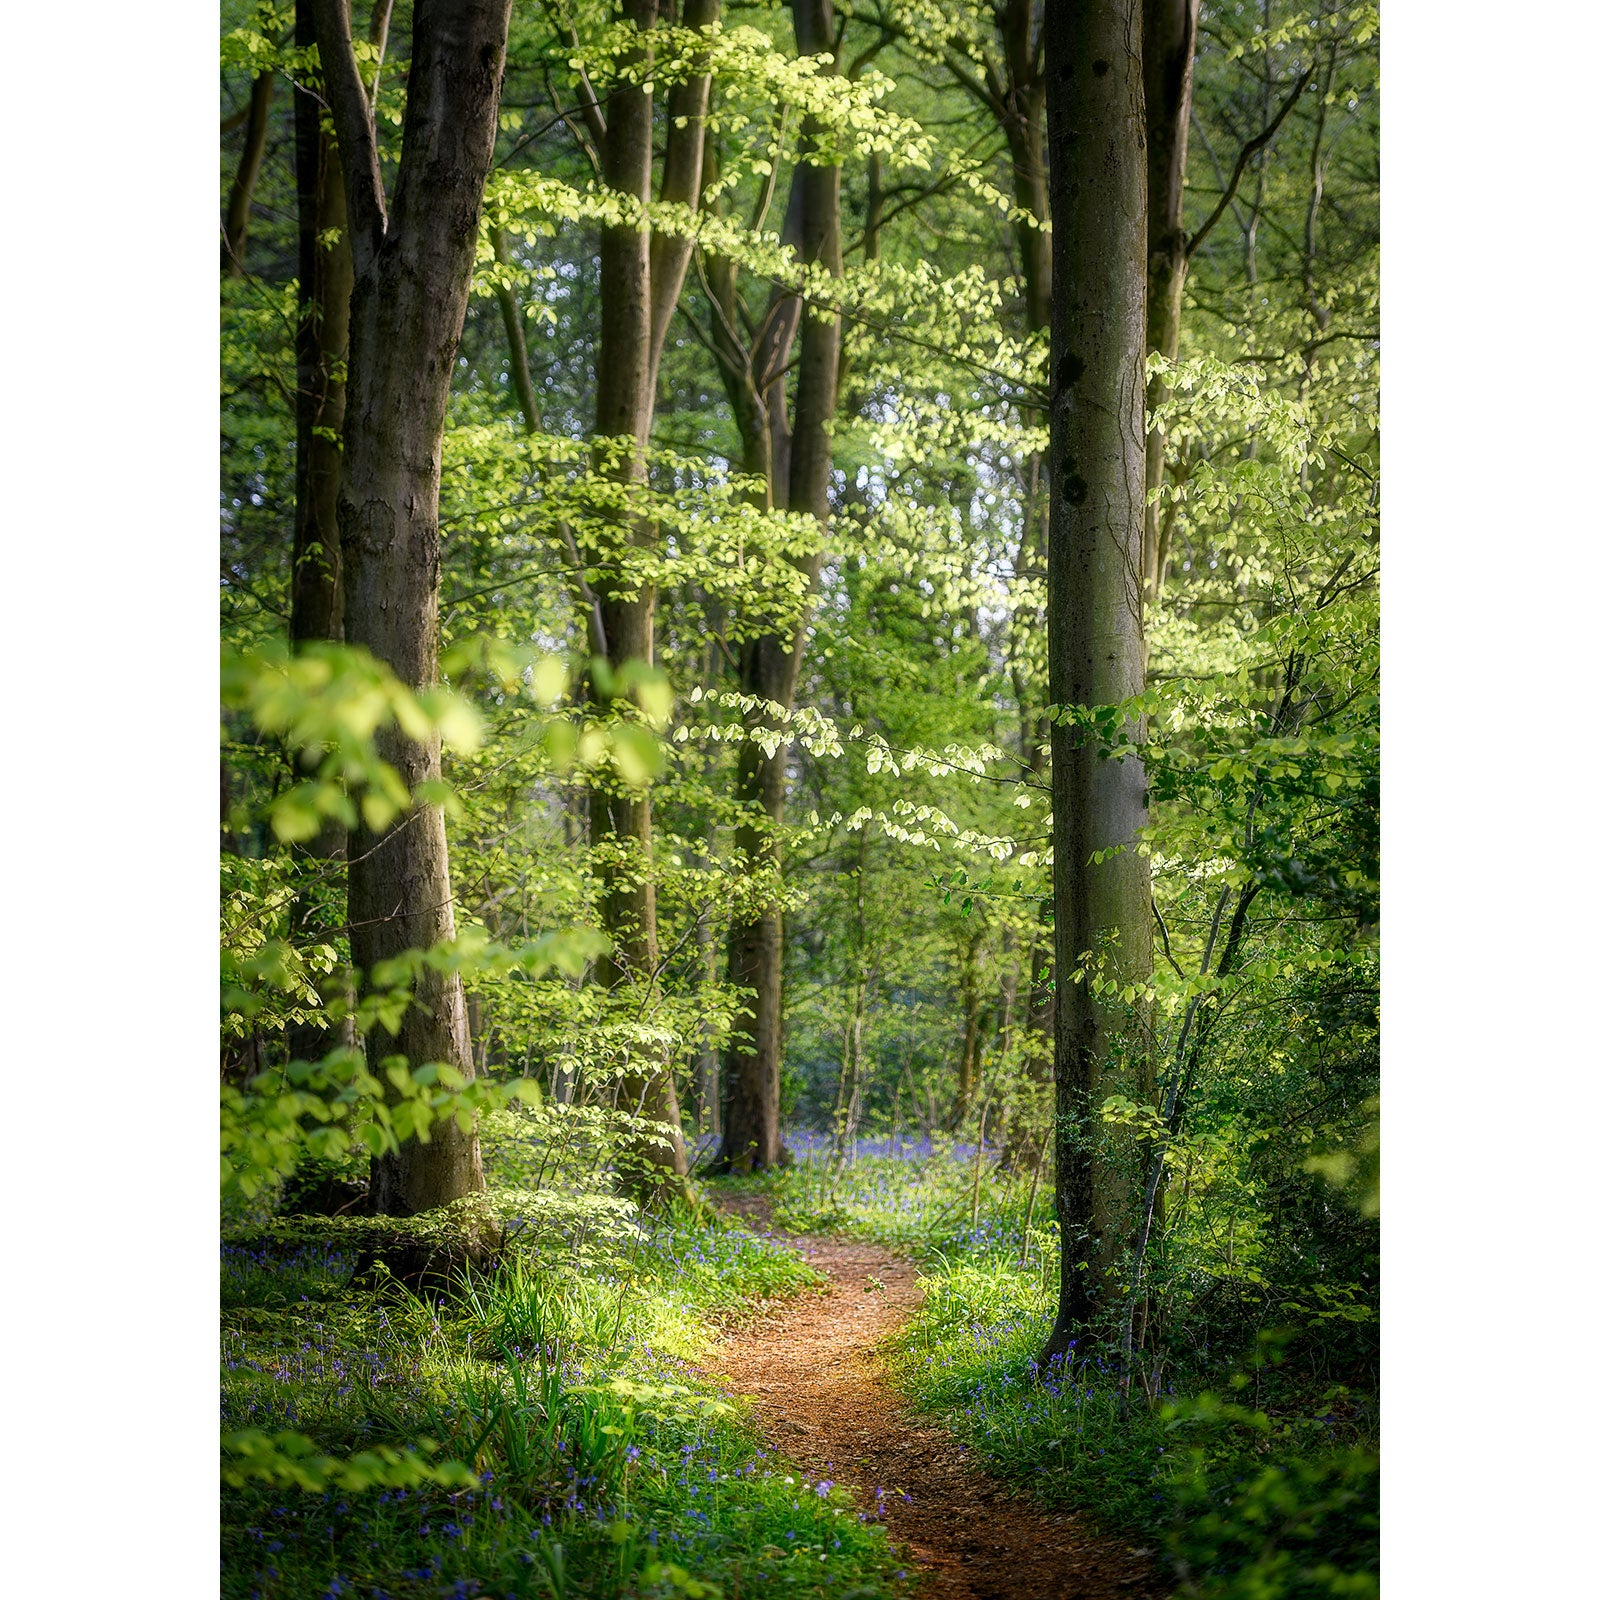 A sunlit path winds through the serene green Isle forest, capturing the beauty of Bluebells from Havenstreet with Available Light Photography.